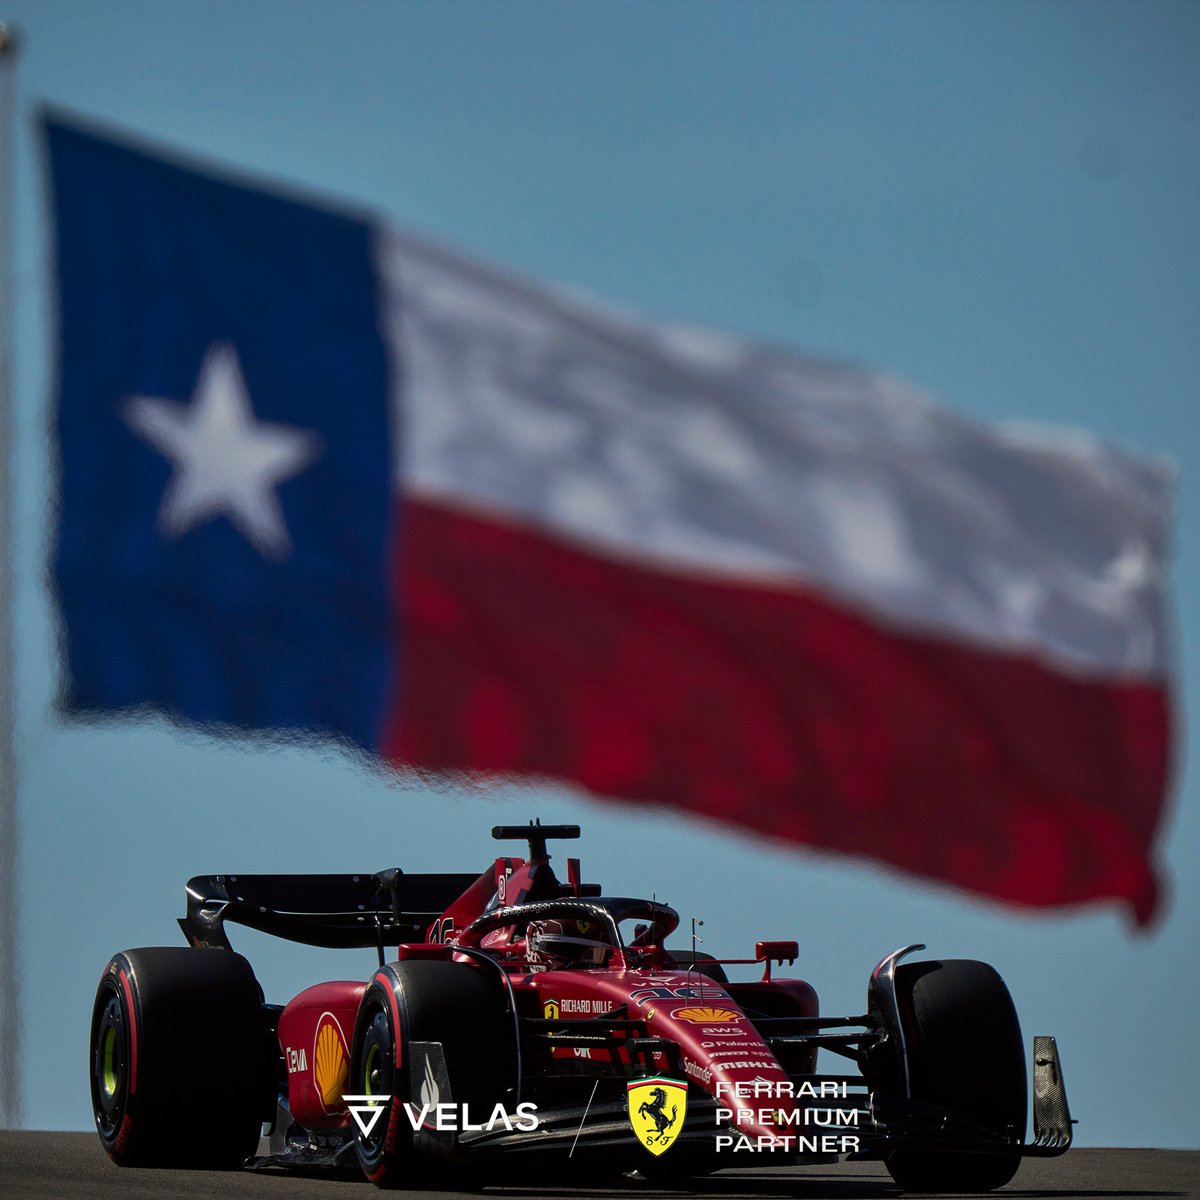 A tricky #USGP for @scuderiaferrari as pole sitter @carlossainz55 was taken out on the first lap and had to retire the car. @charles_leclerc carried the team for the race, claiming his 10th podium of the season. Forza Ferrari, #FutureDriven #essereFerrari🔴 #Velas #VLX $VLX